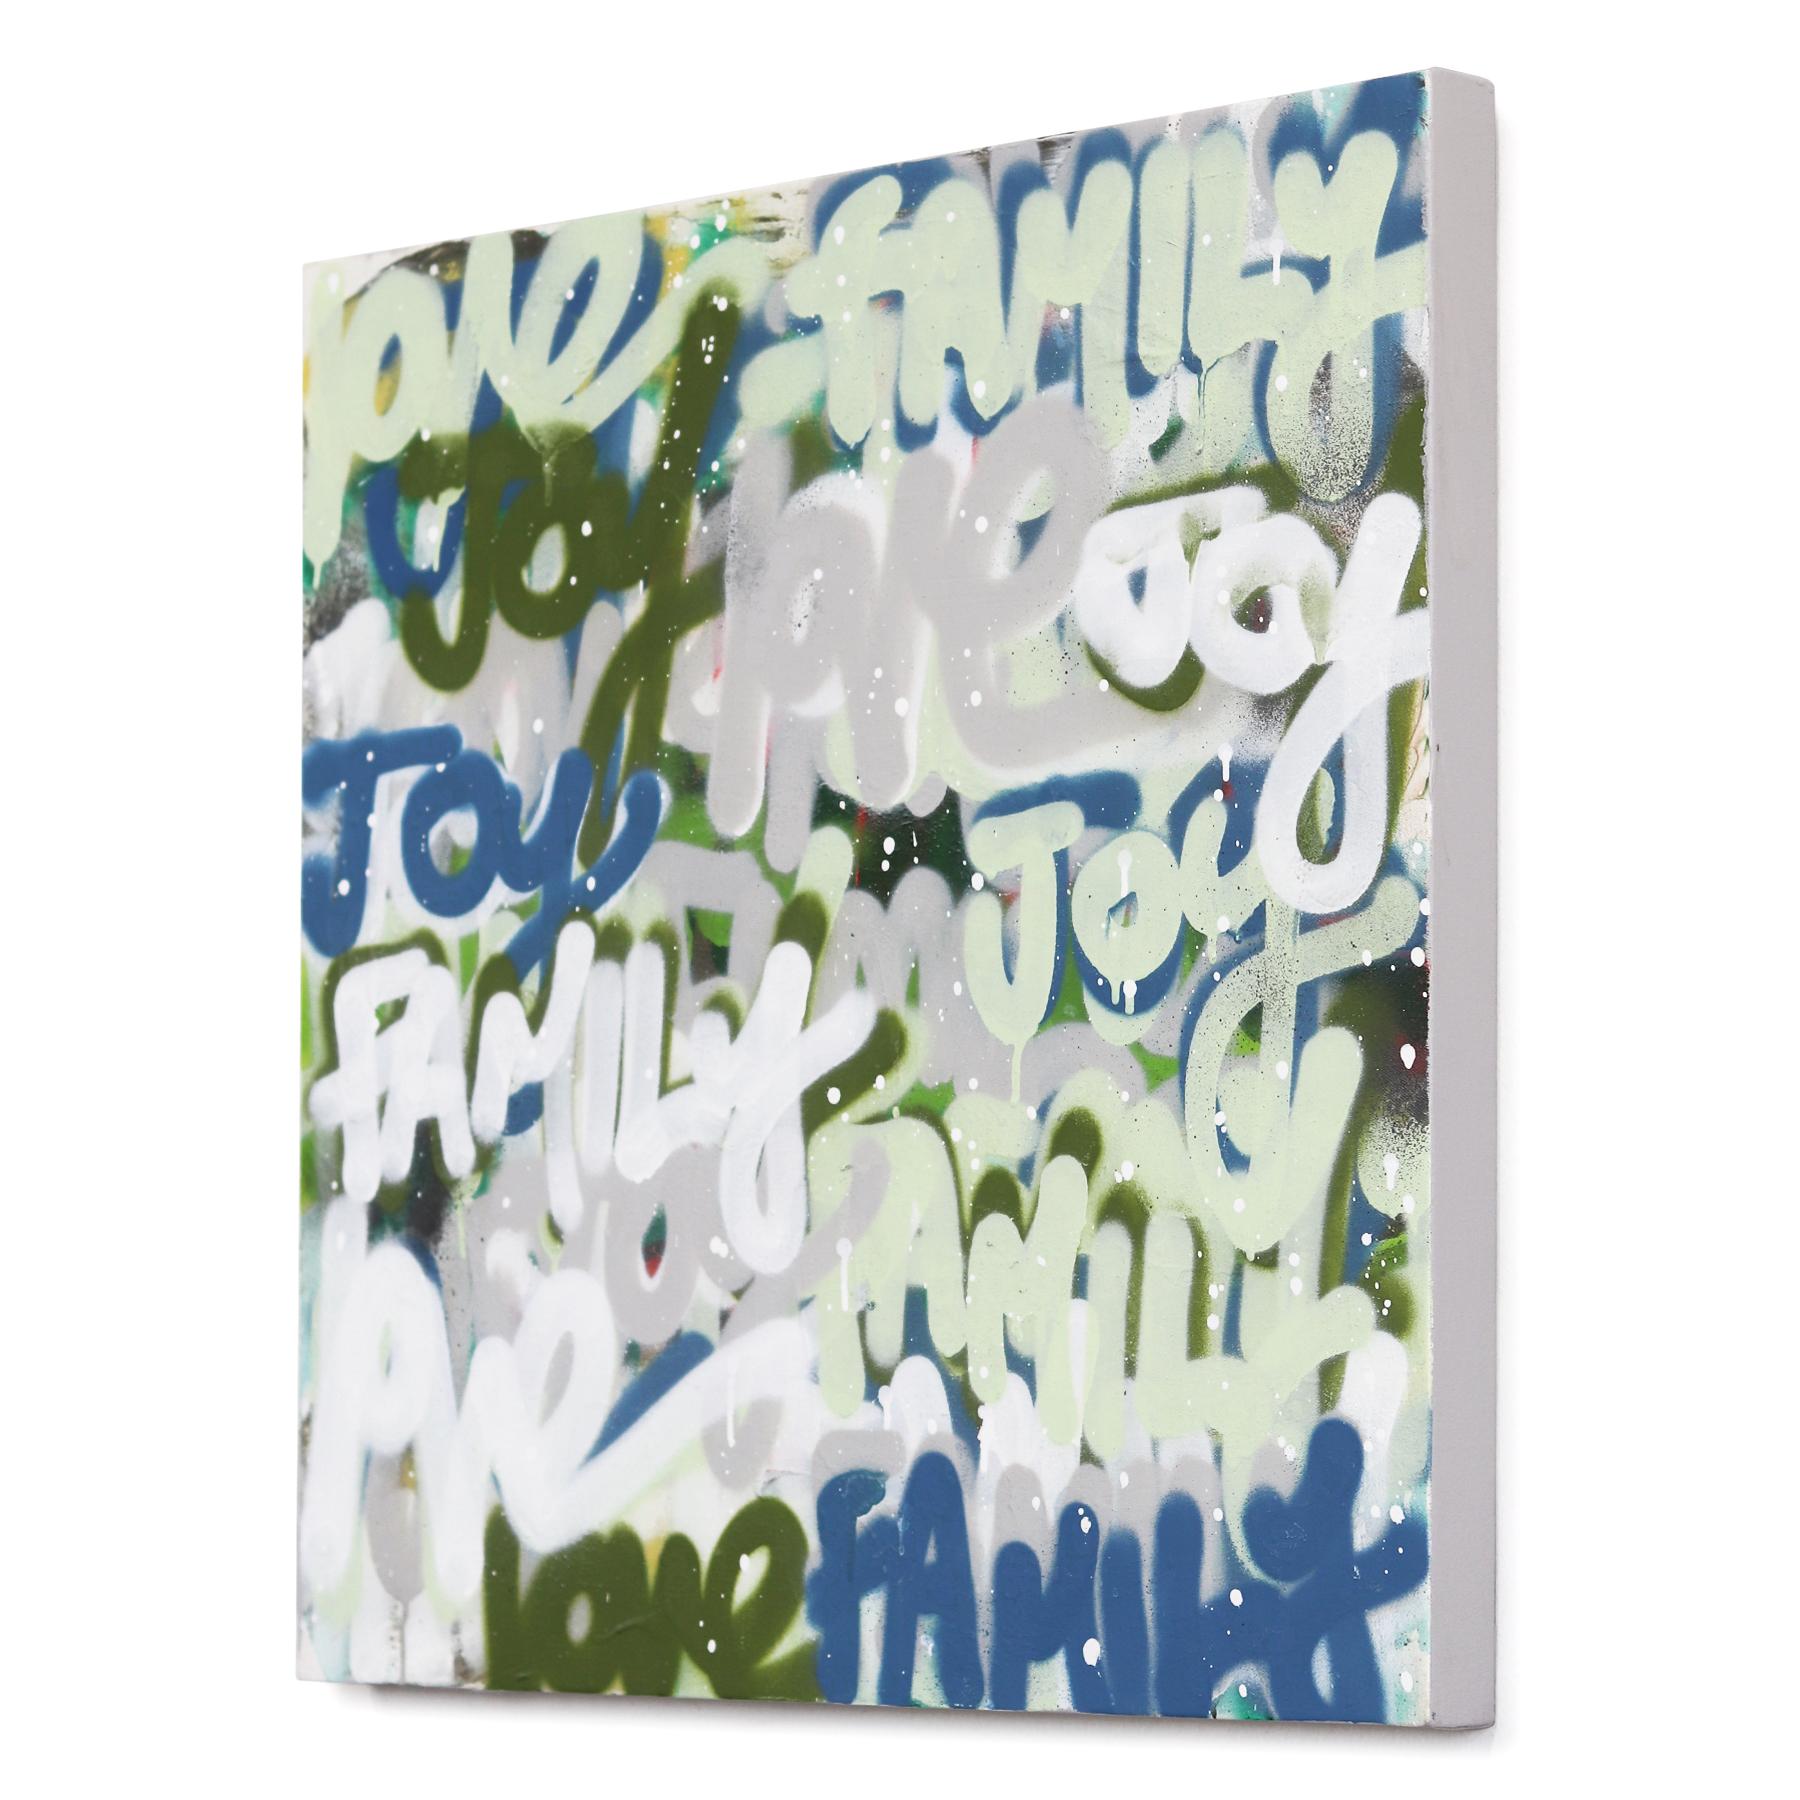 We Stick Together - Original Blue Gray Green Family Love Joy Graffiti on Canvas - Street Art Painting by Amber Goldhammer